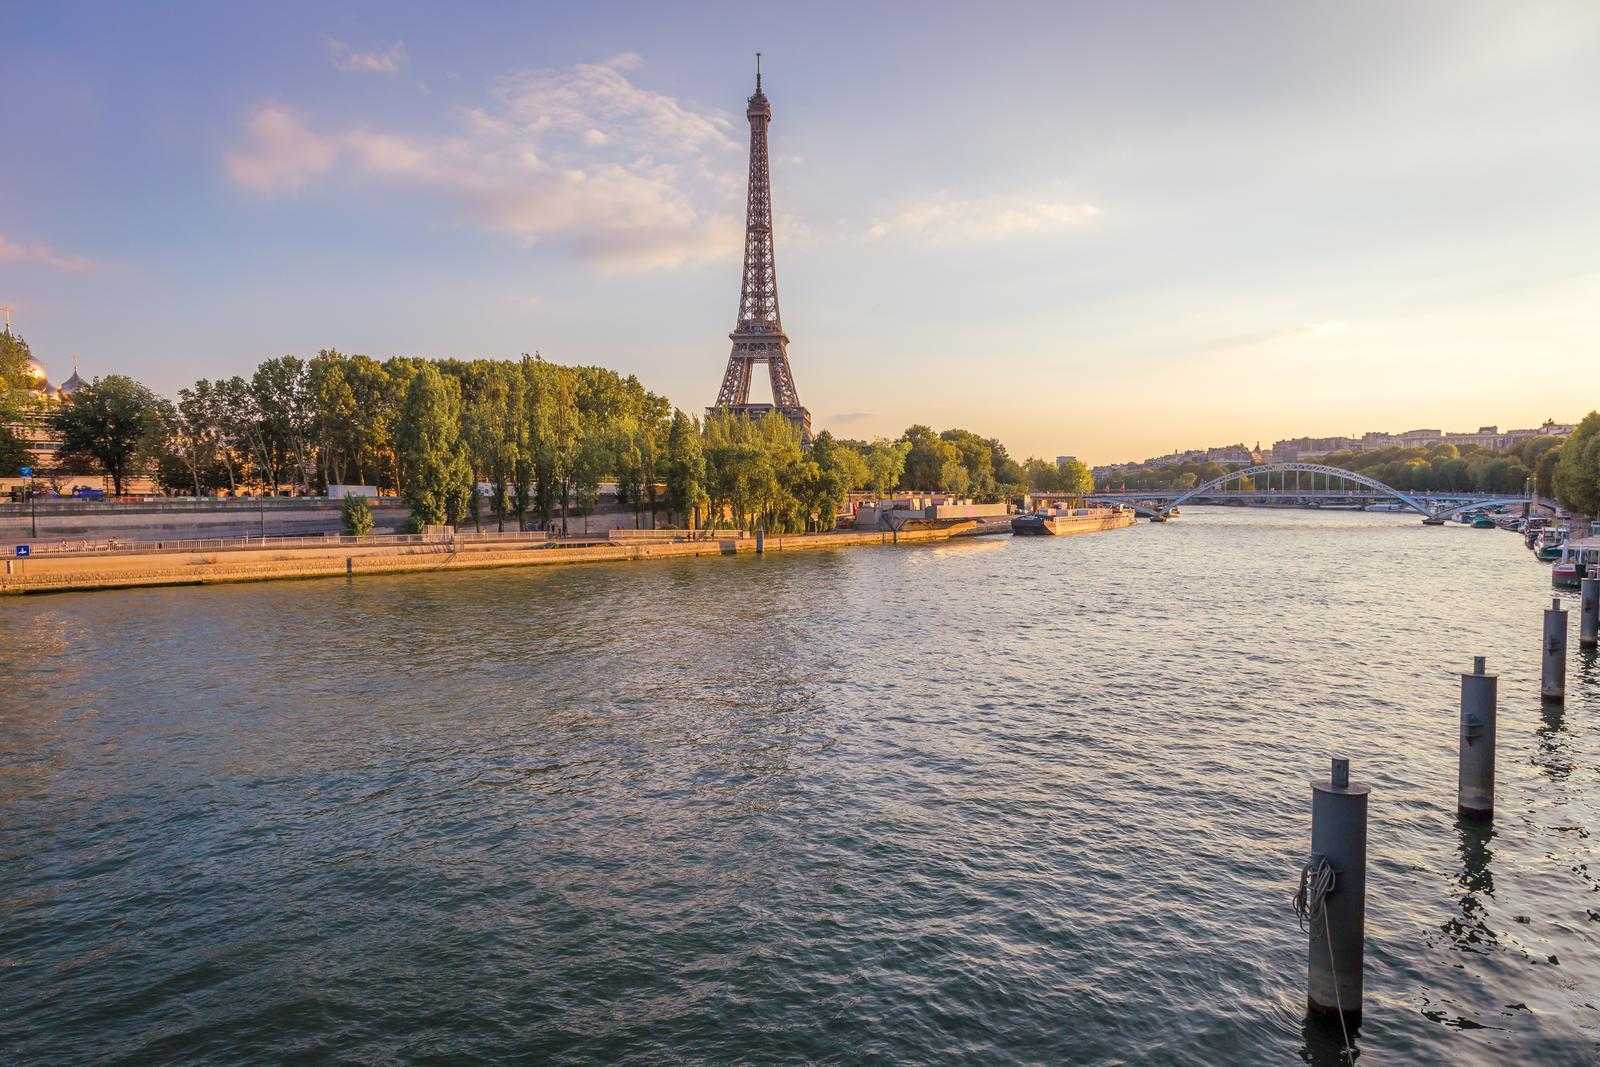 Seine River Dinner Cruise Menu - What you should expect?